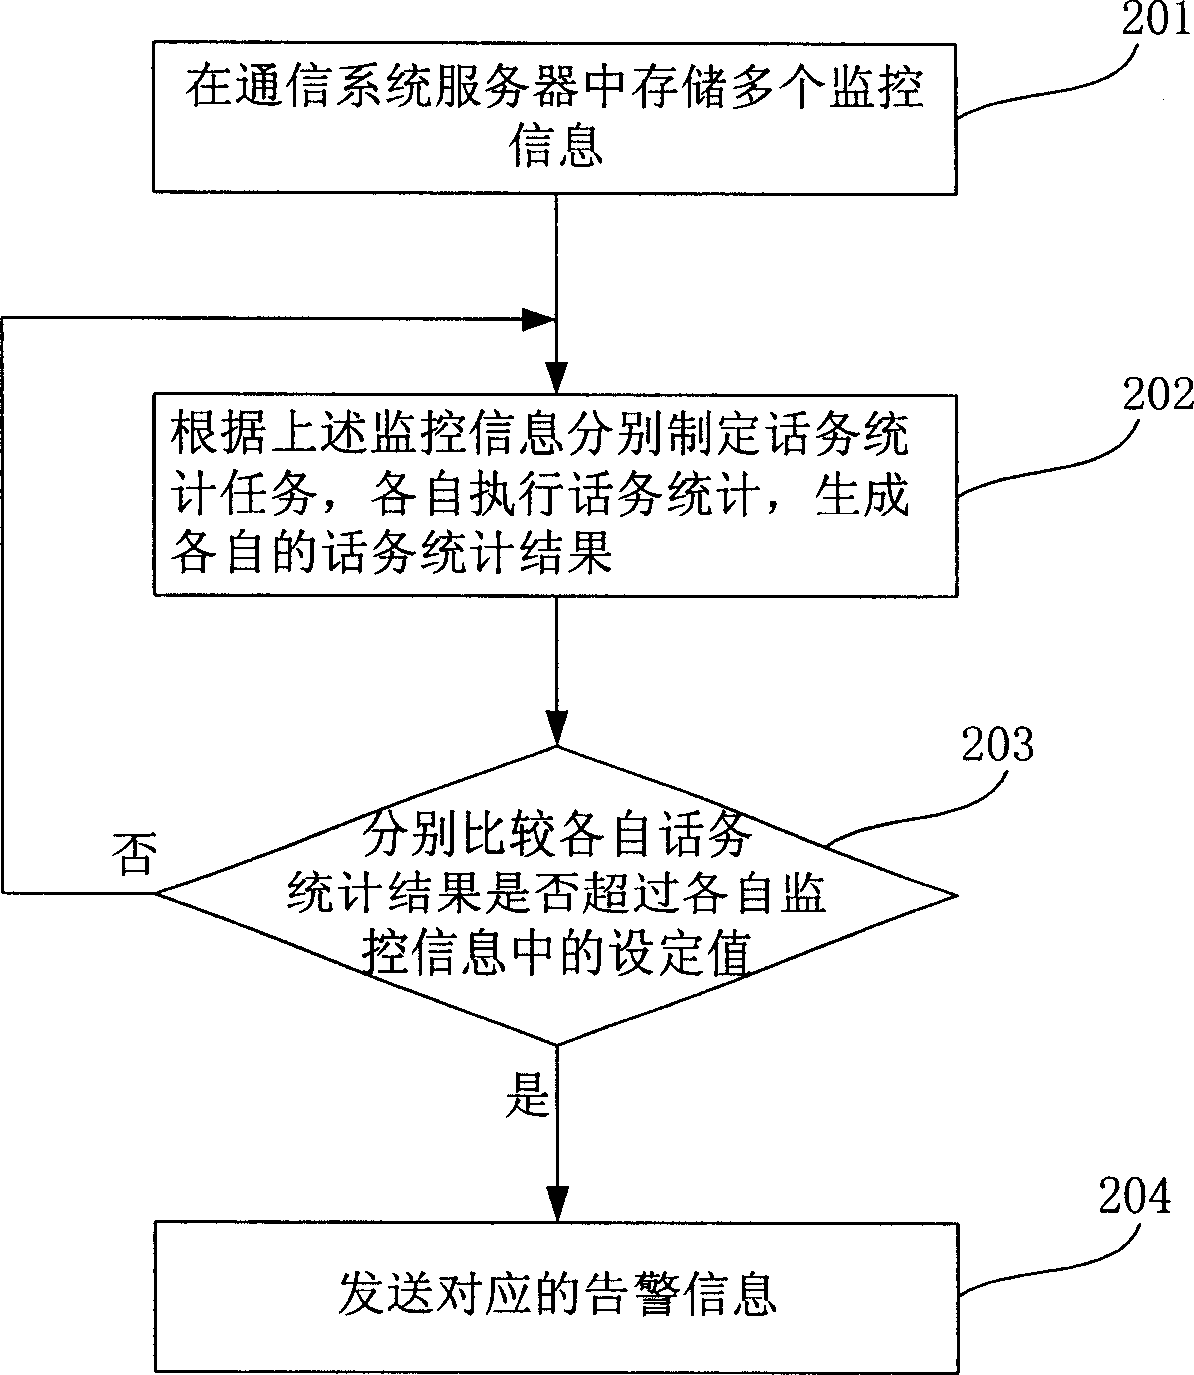 Communication system for implementing real-time monitoring warning and its method